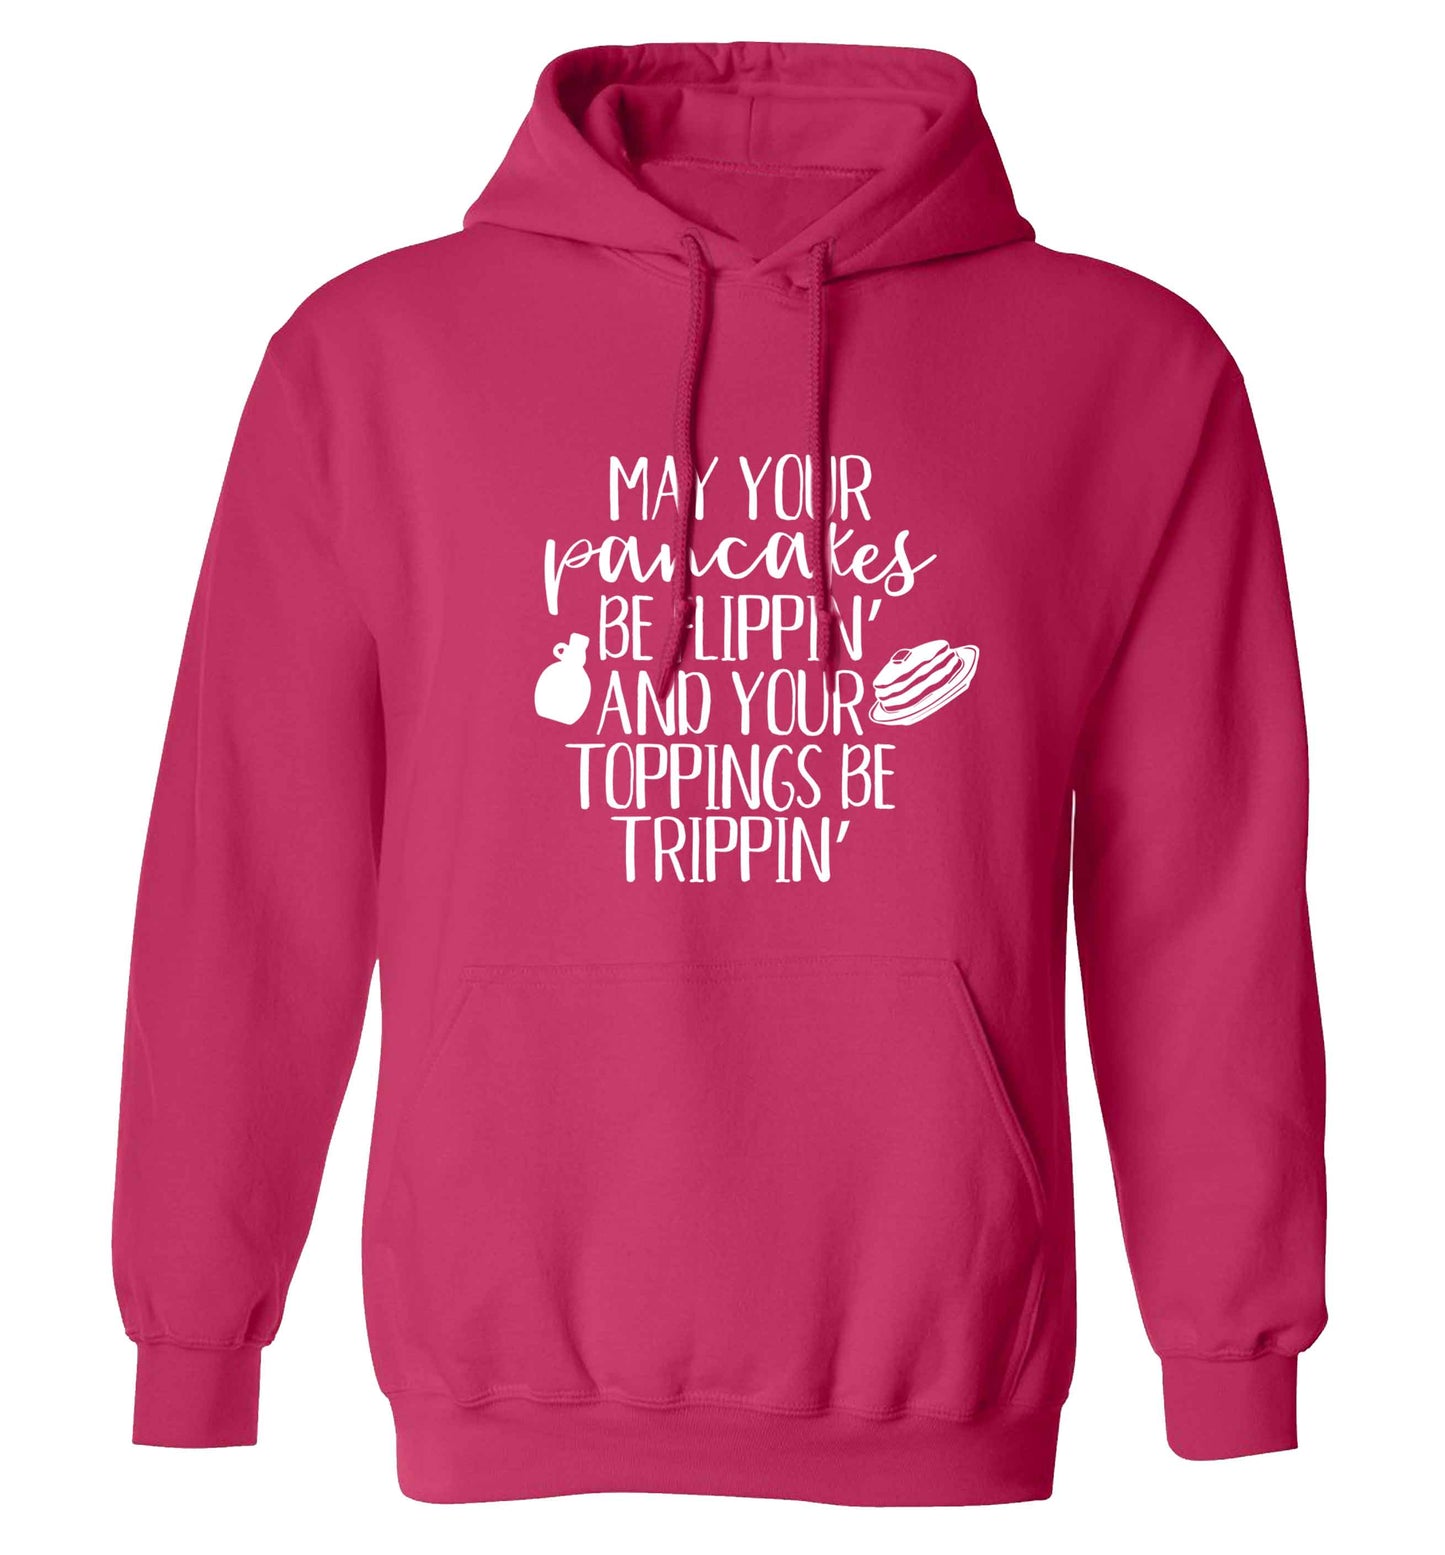 May your pancakes be flippin' and your toppings be trippin' adults unisex pink hoodie 2XL